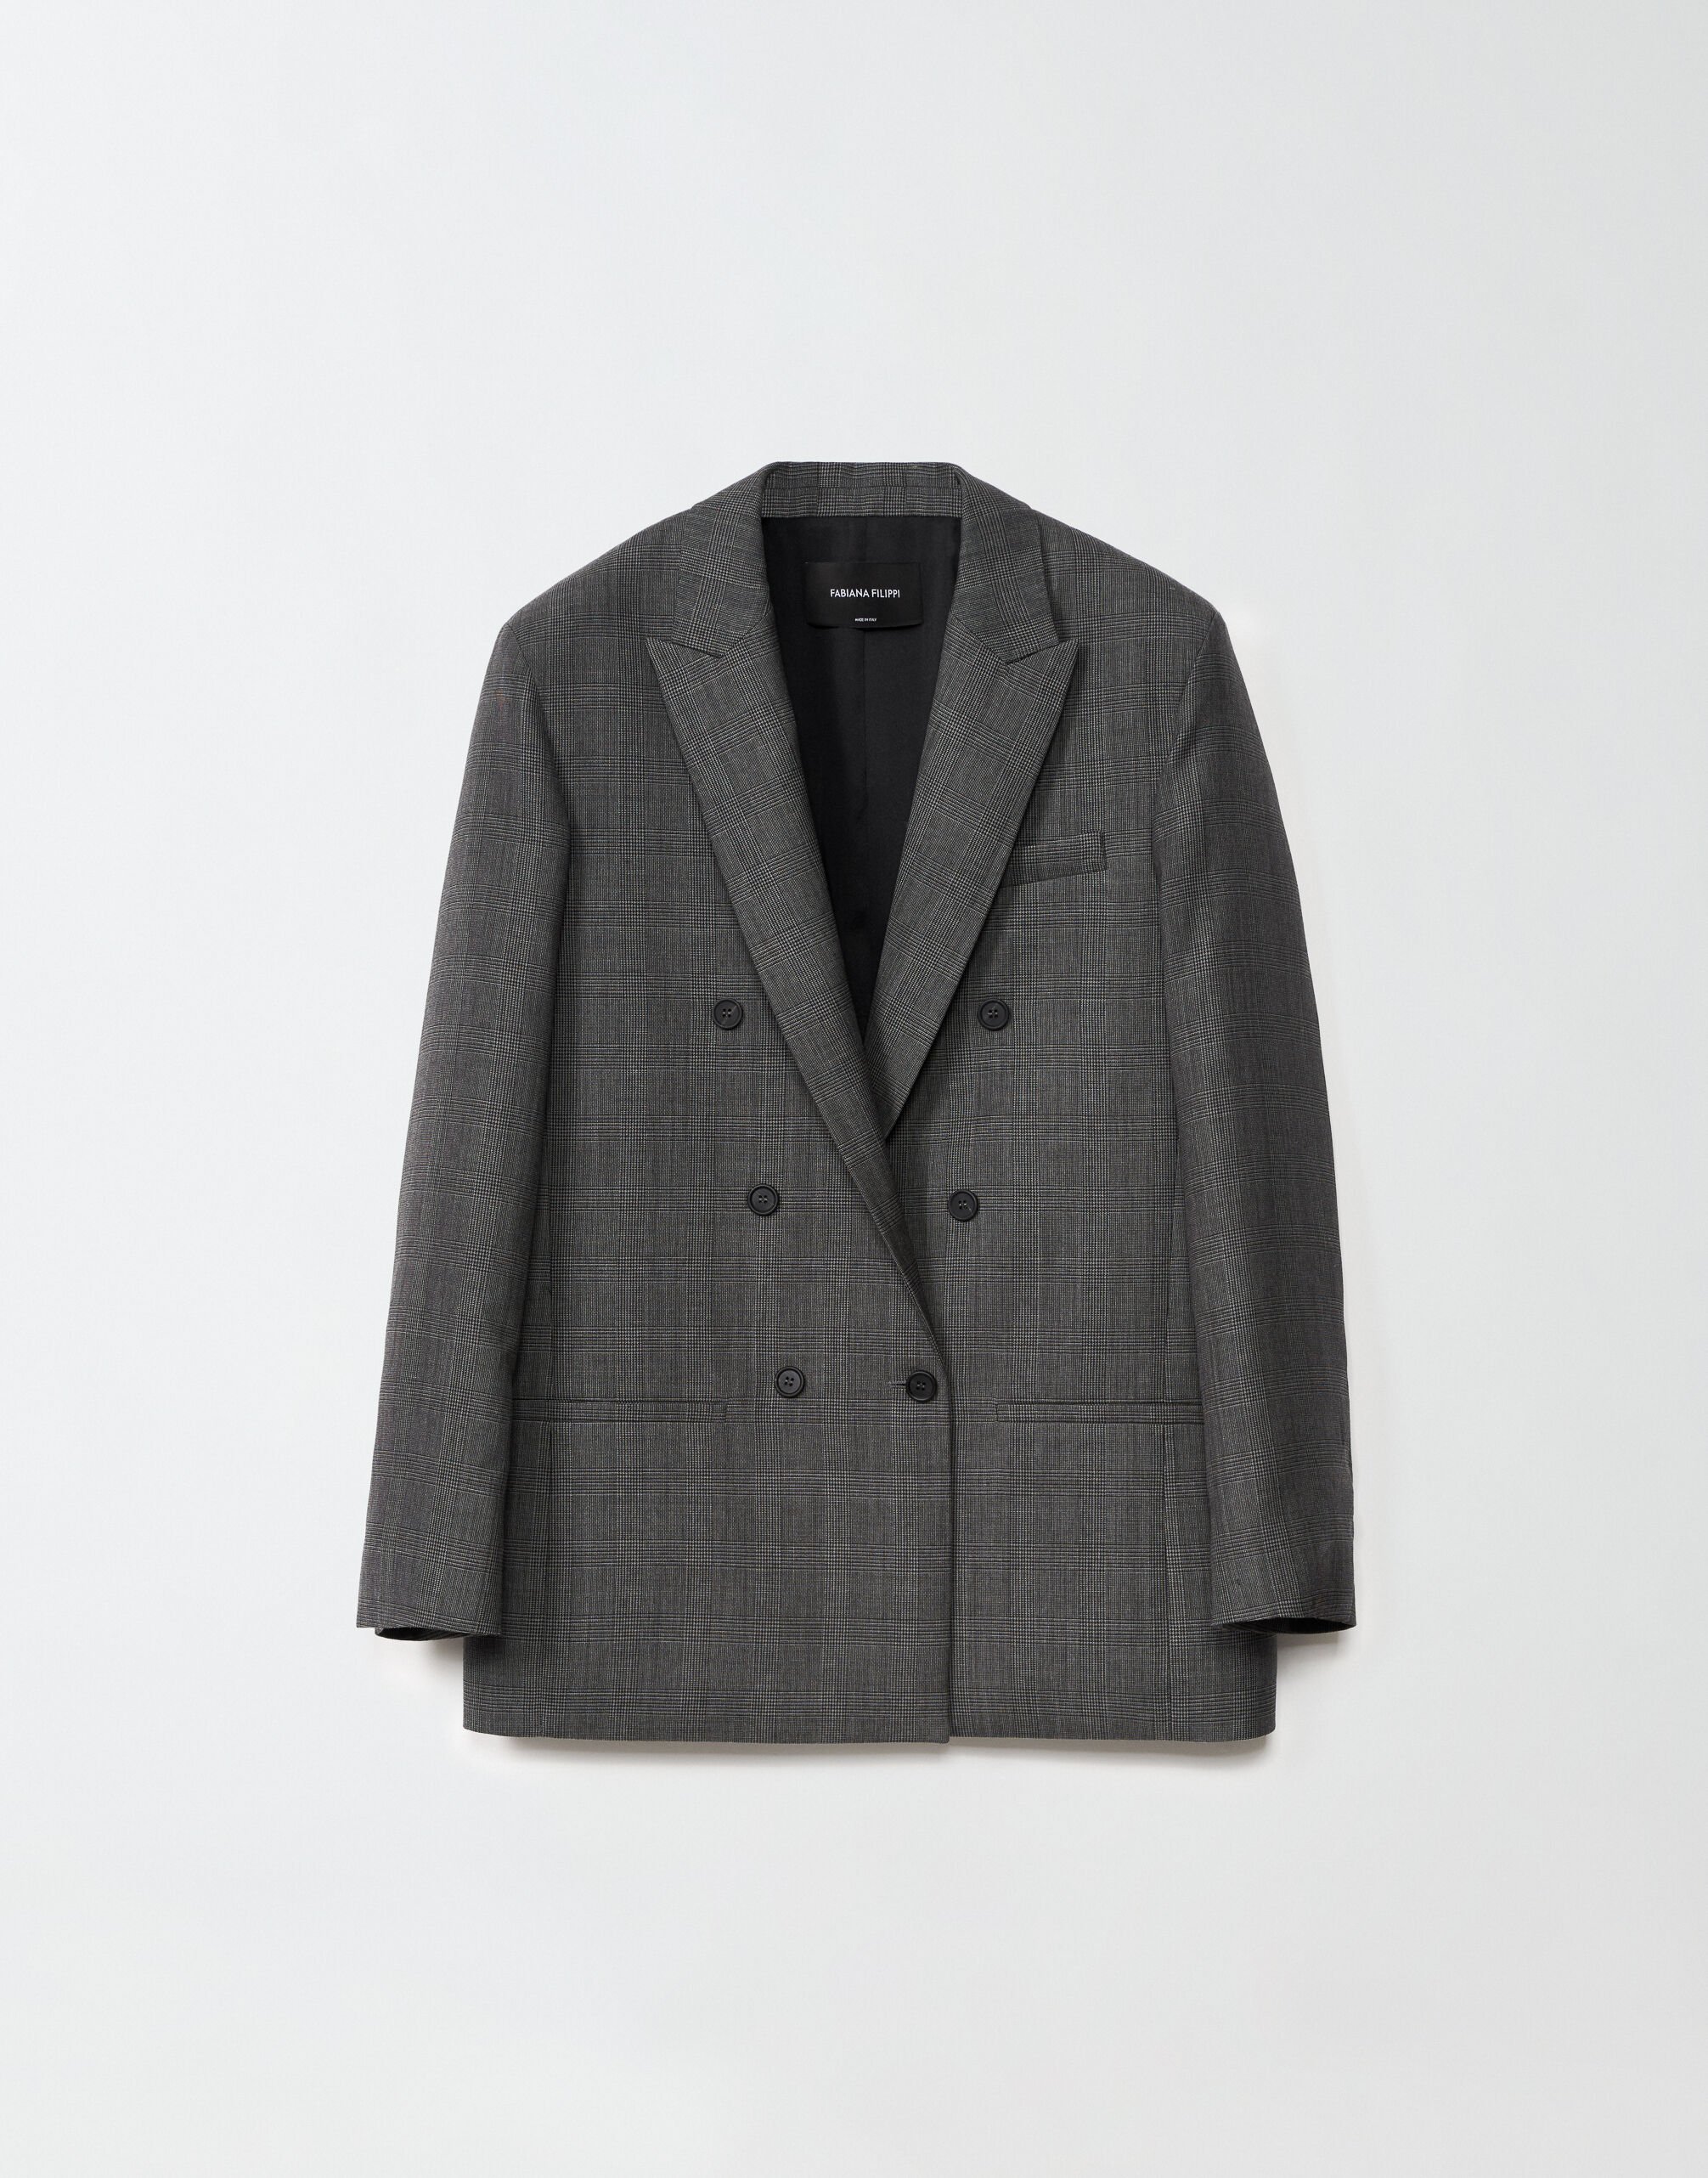 ${brand} Glen plaid double-breasted jacket, dark grey and black ${colorDescription} ${masterID}